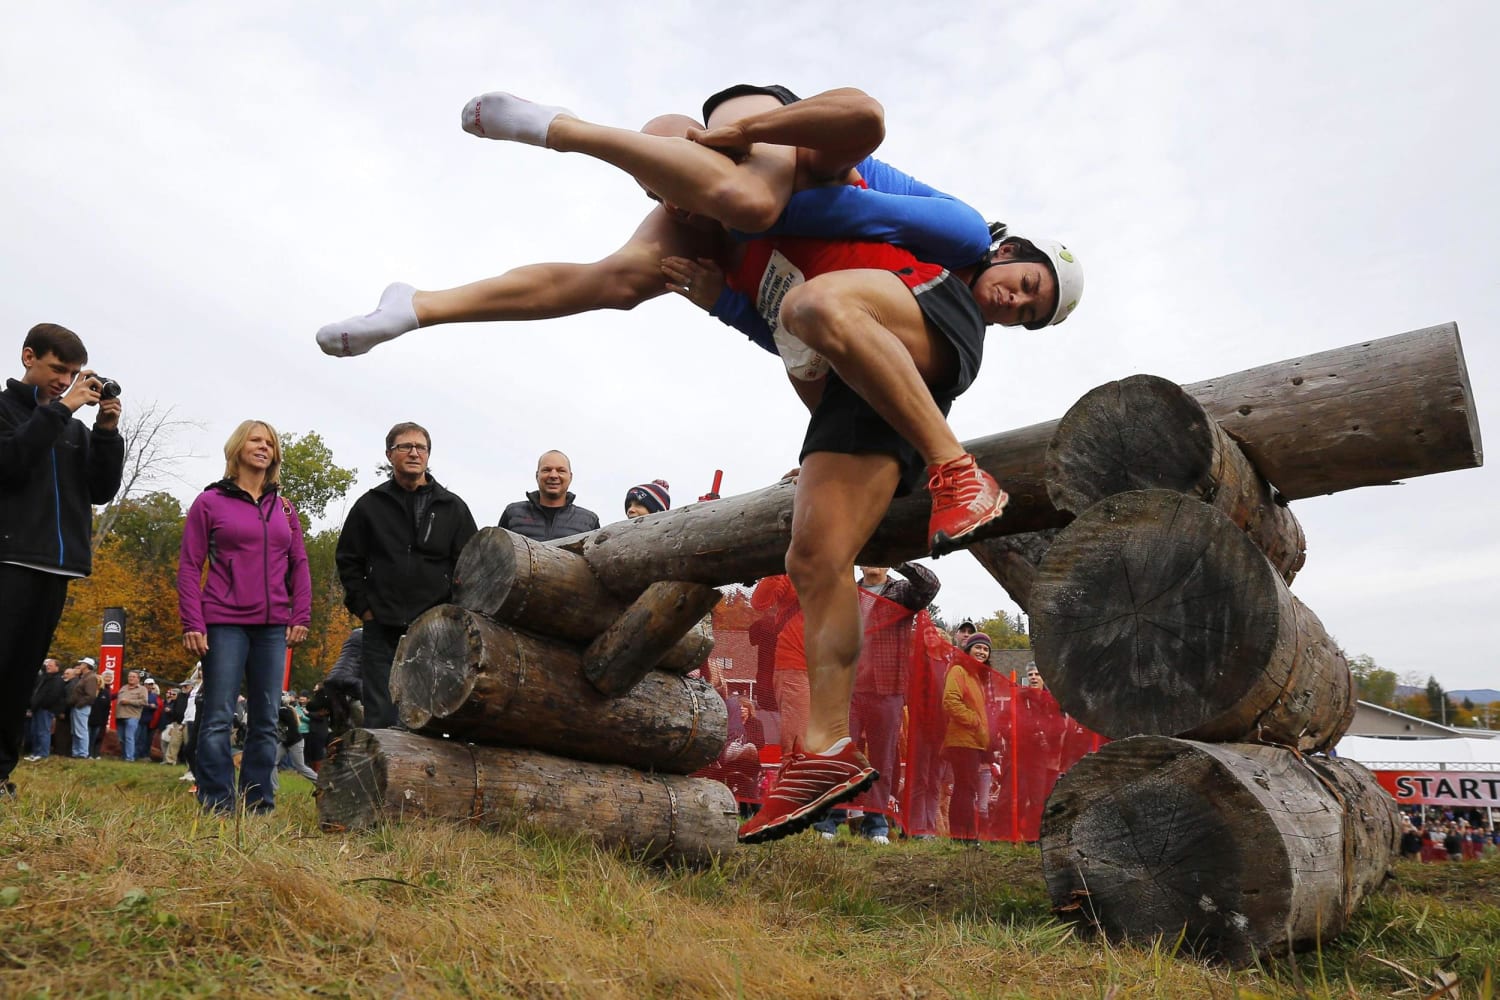 Wife-Carrying Contest Brings Finnish Tradition Stateside